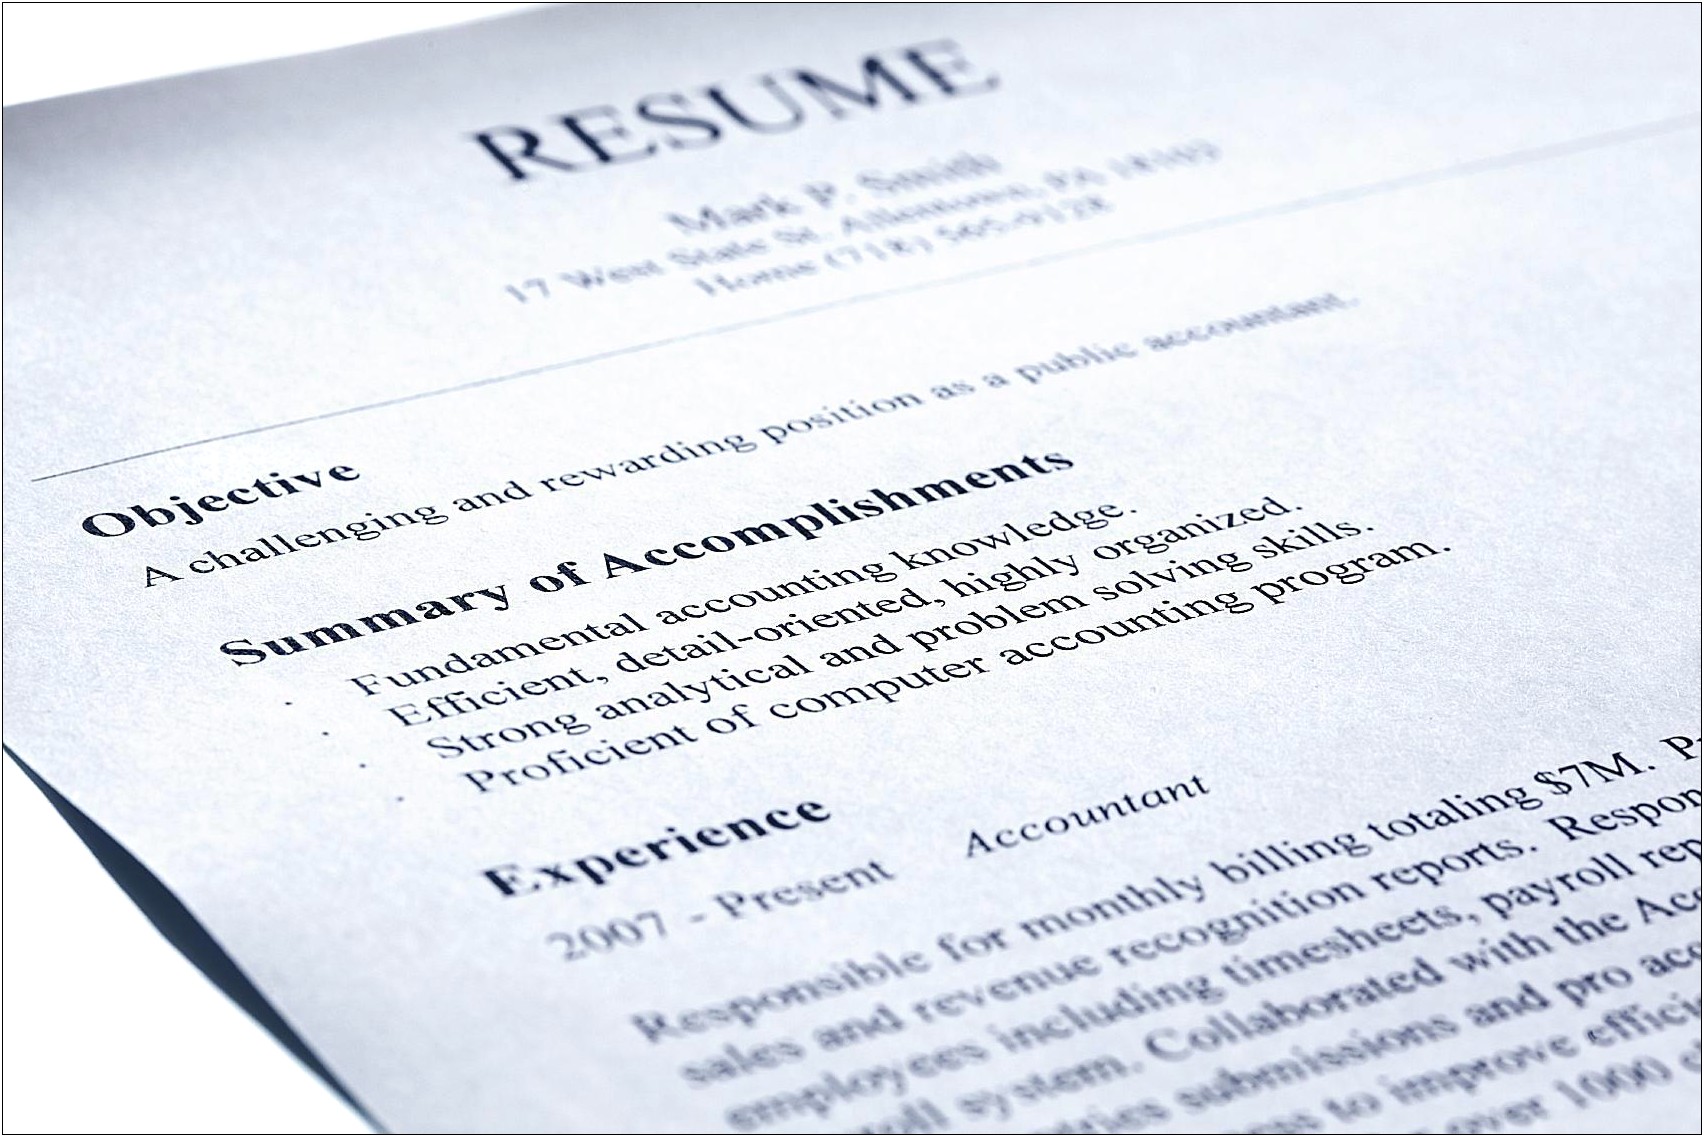 Best Information Technology Resume Writers